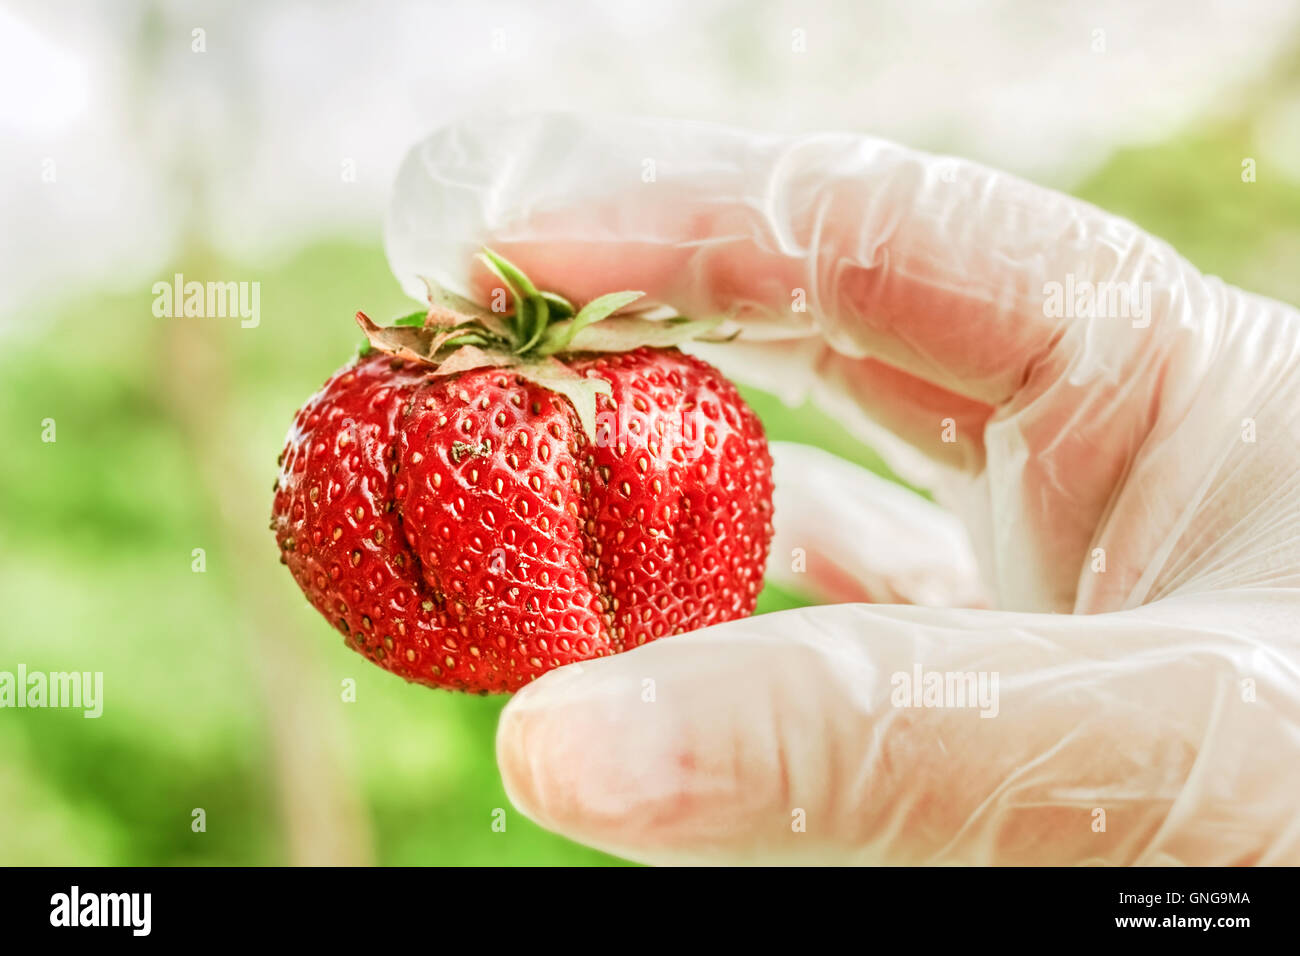 Big red ripe strawberry in fingers with gloves Stock Photo